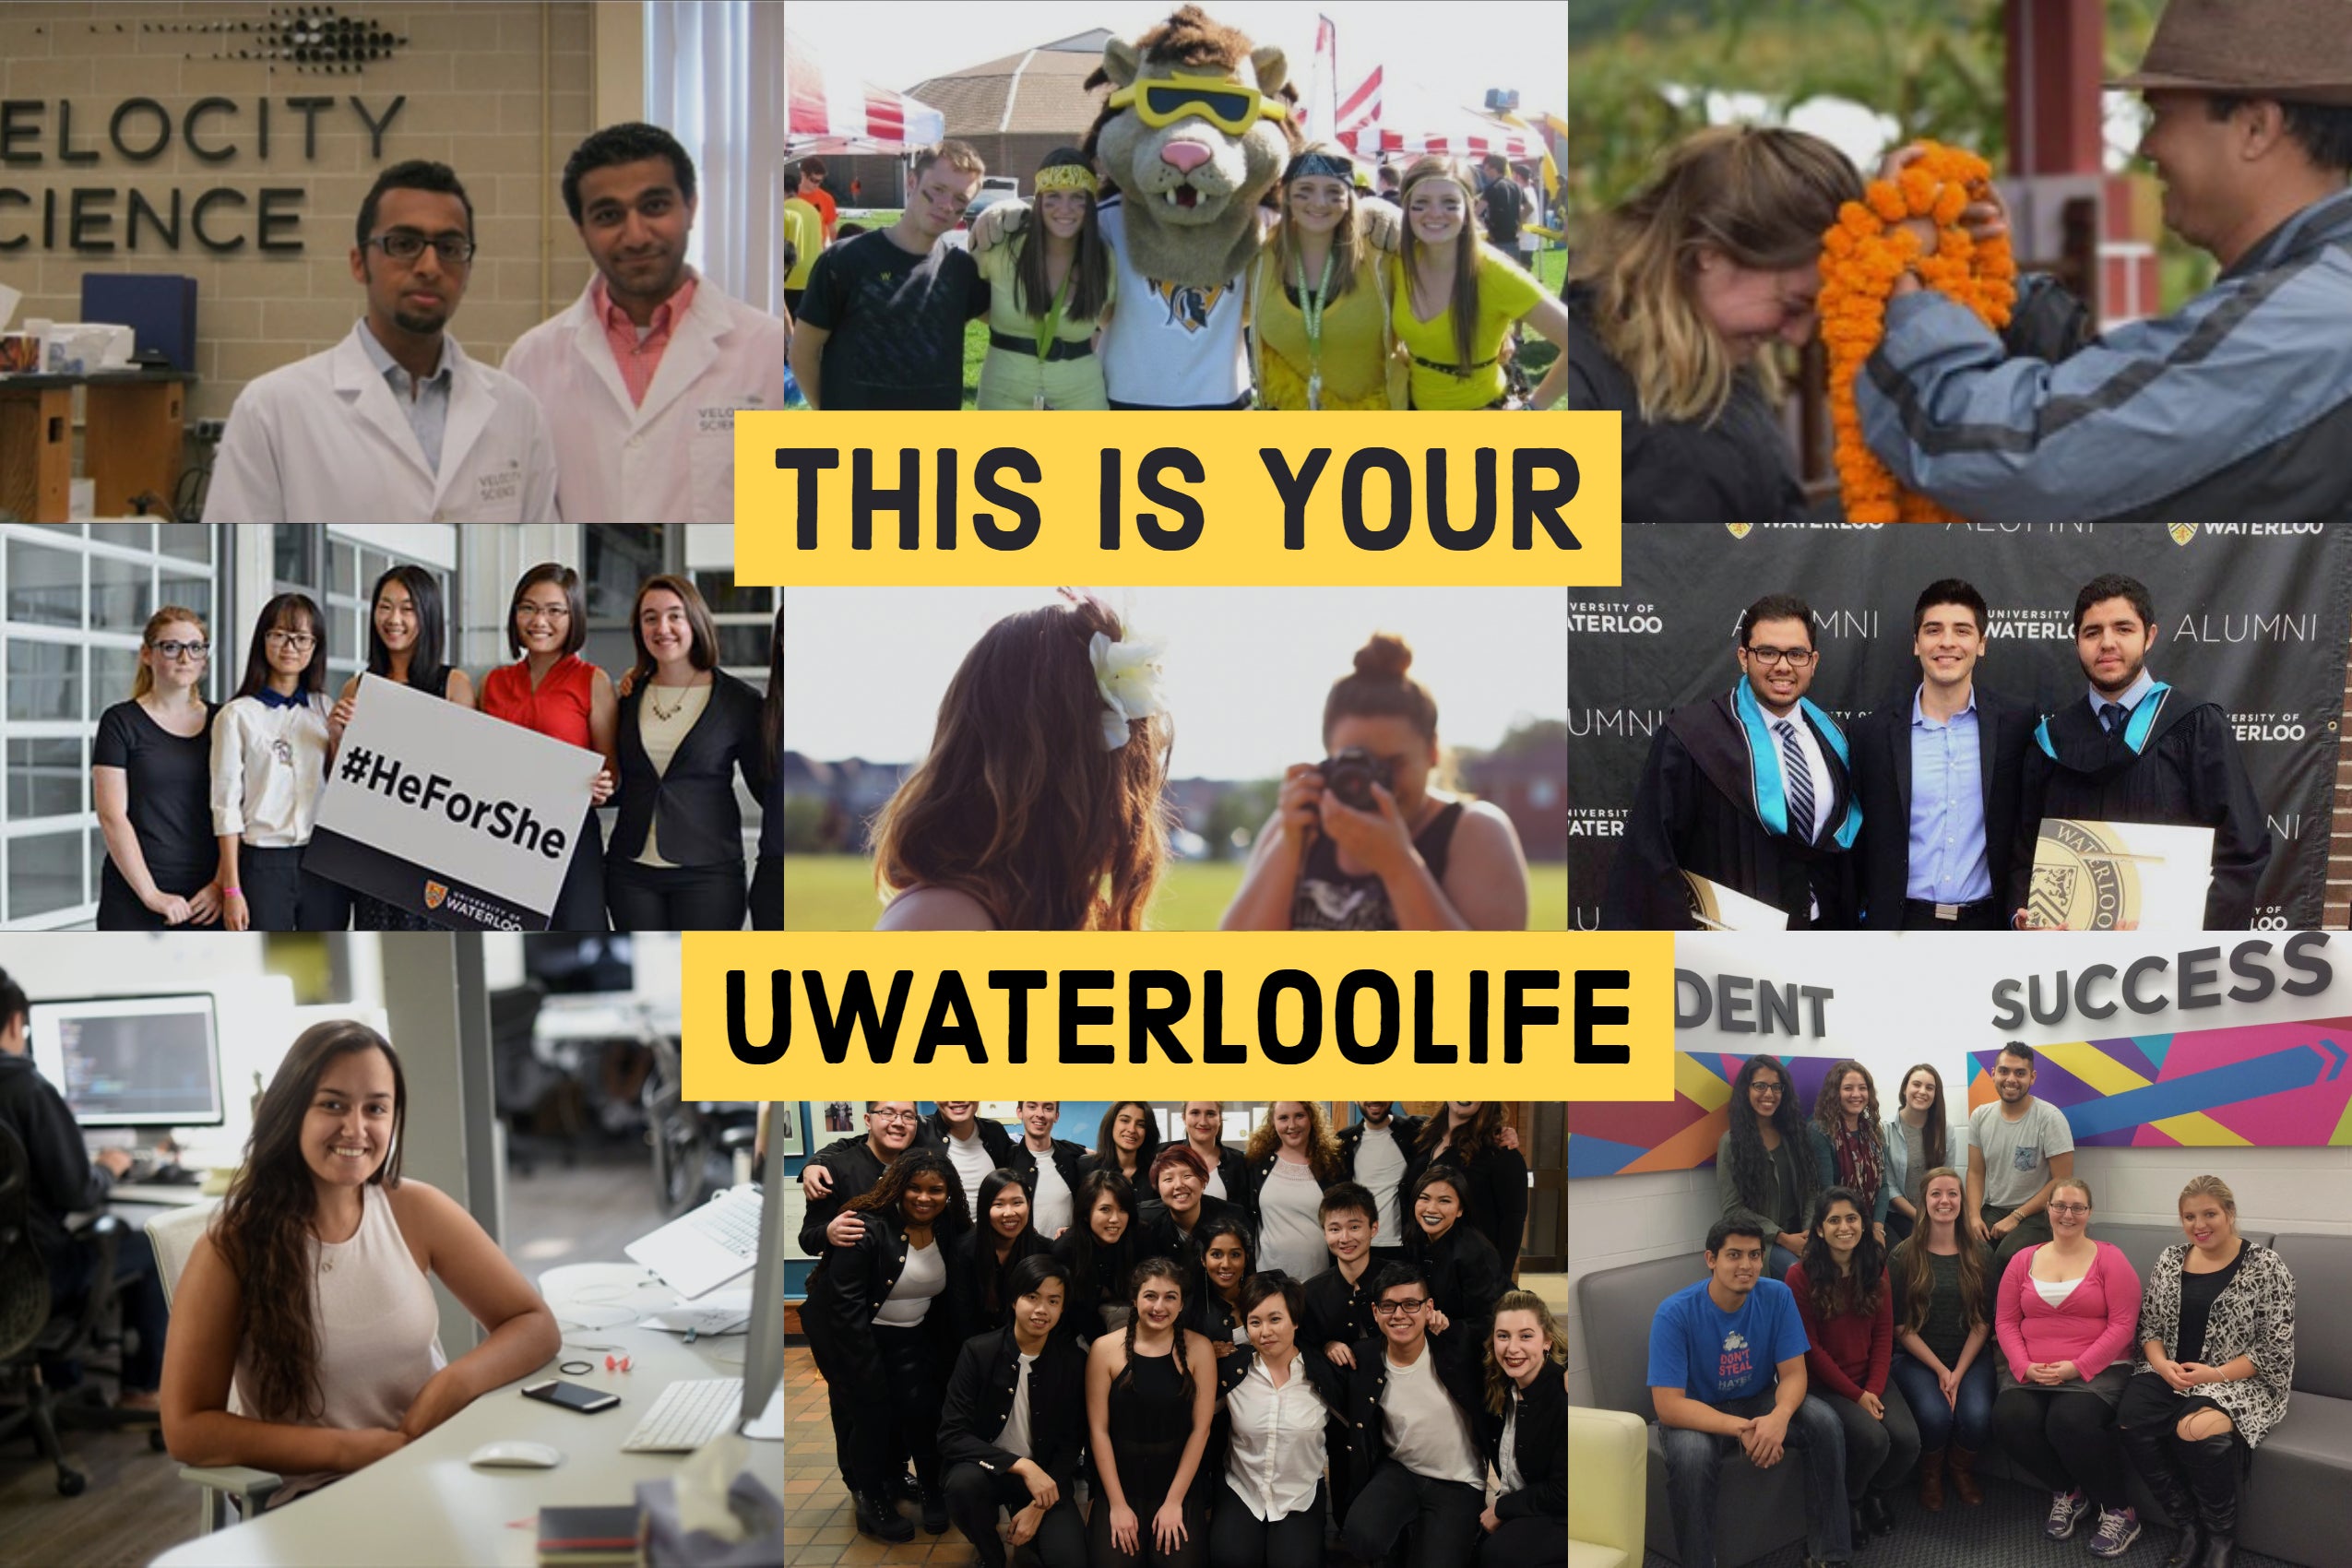 "This is your UWaterloolife”.